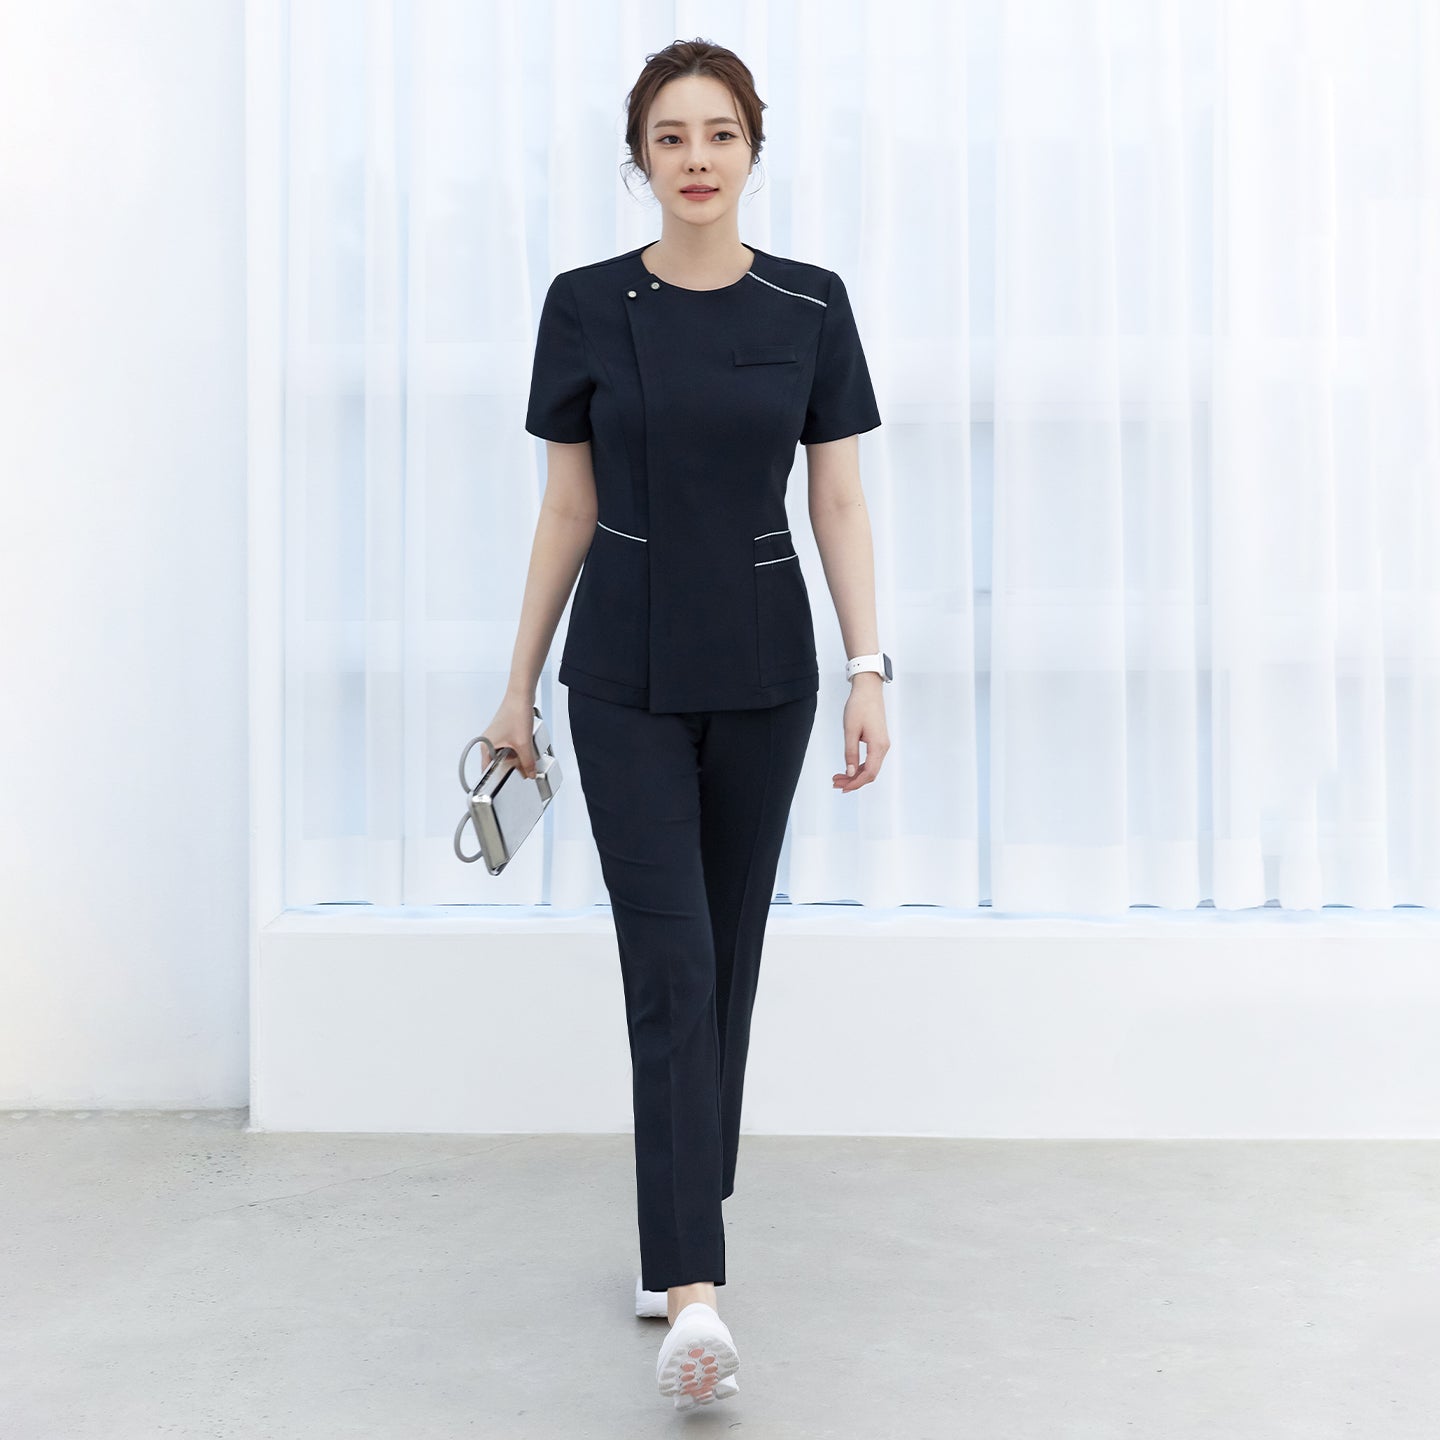 Woman walking in navy side-banding scrub pants with a matching navy top featuring white piping details and short sleeves, showing the full front view,Mir Navy